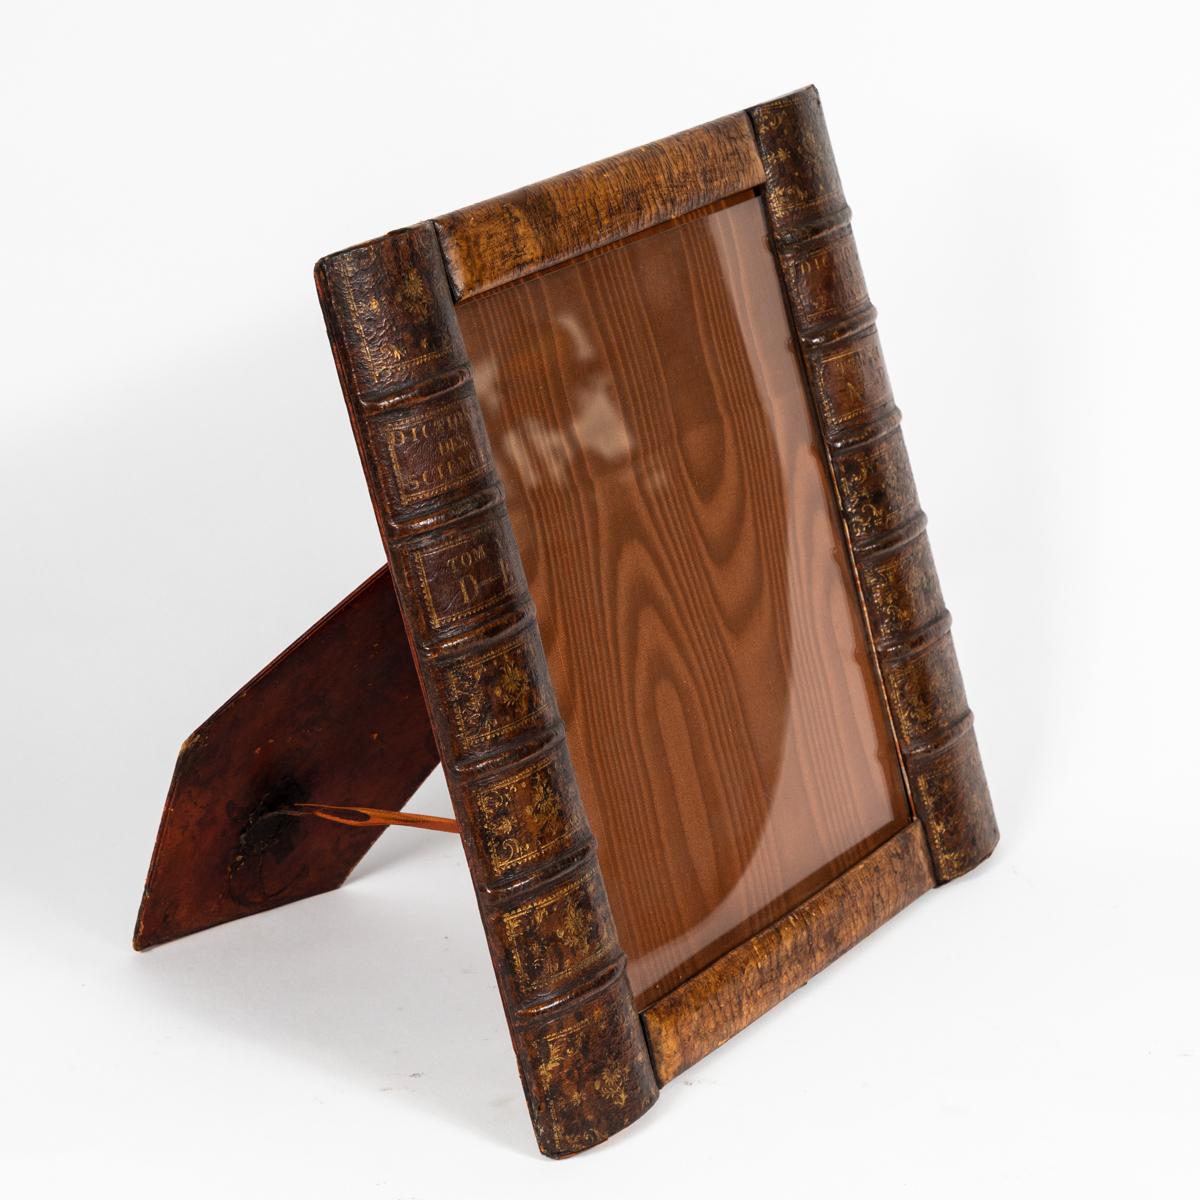 Early 20th century leather book picture frame from England. This piece has acquired a unique patina over its life, furthering the effect of the false book. 